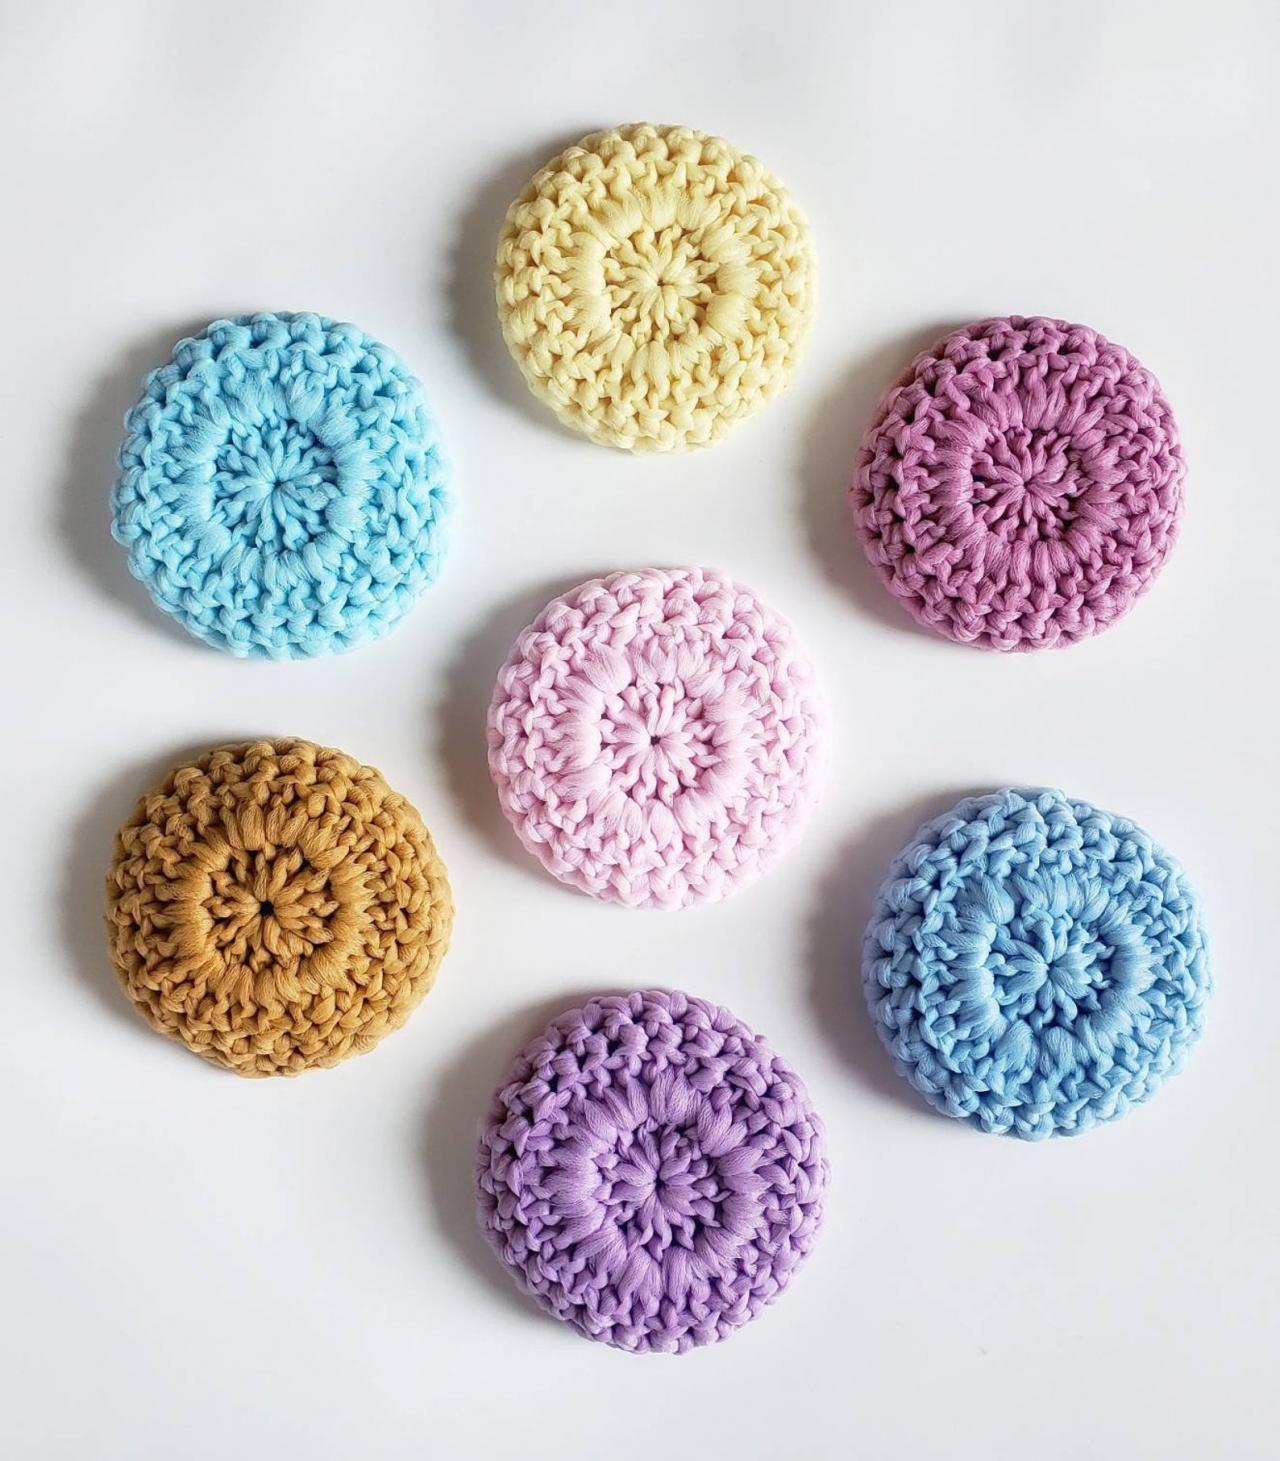 Solstice Dish Scrubby - Tulle Scrubby - Crochet Dish Scrubbies - Crochet Tulle Scrubby - Colorful Scrubby - Solstice Scrubby (choose 2)